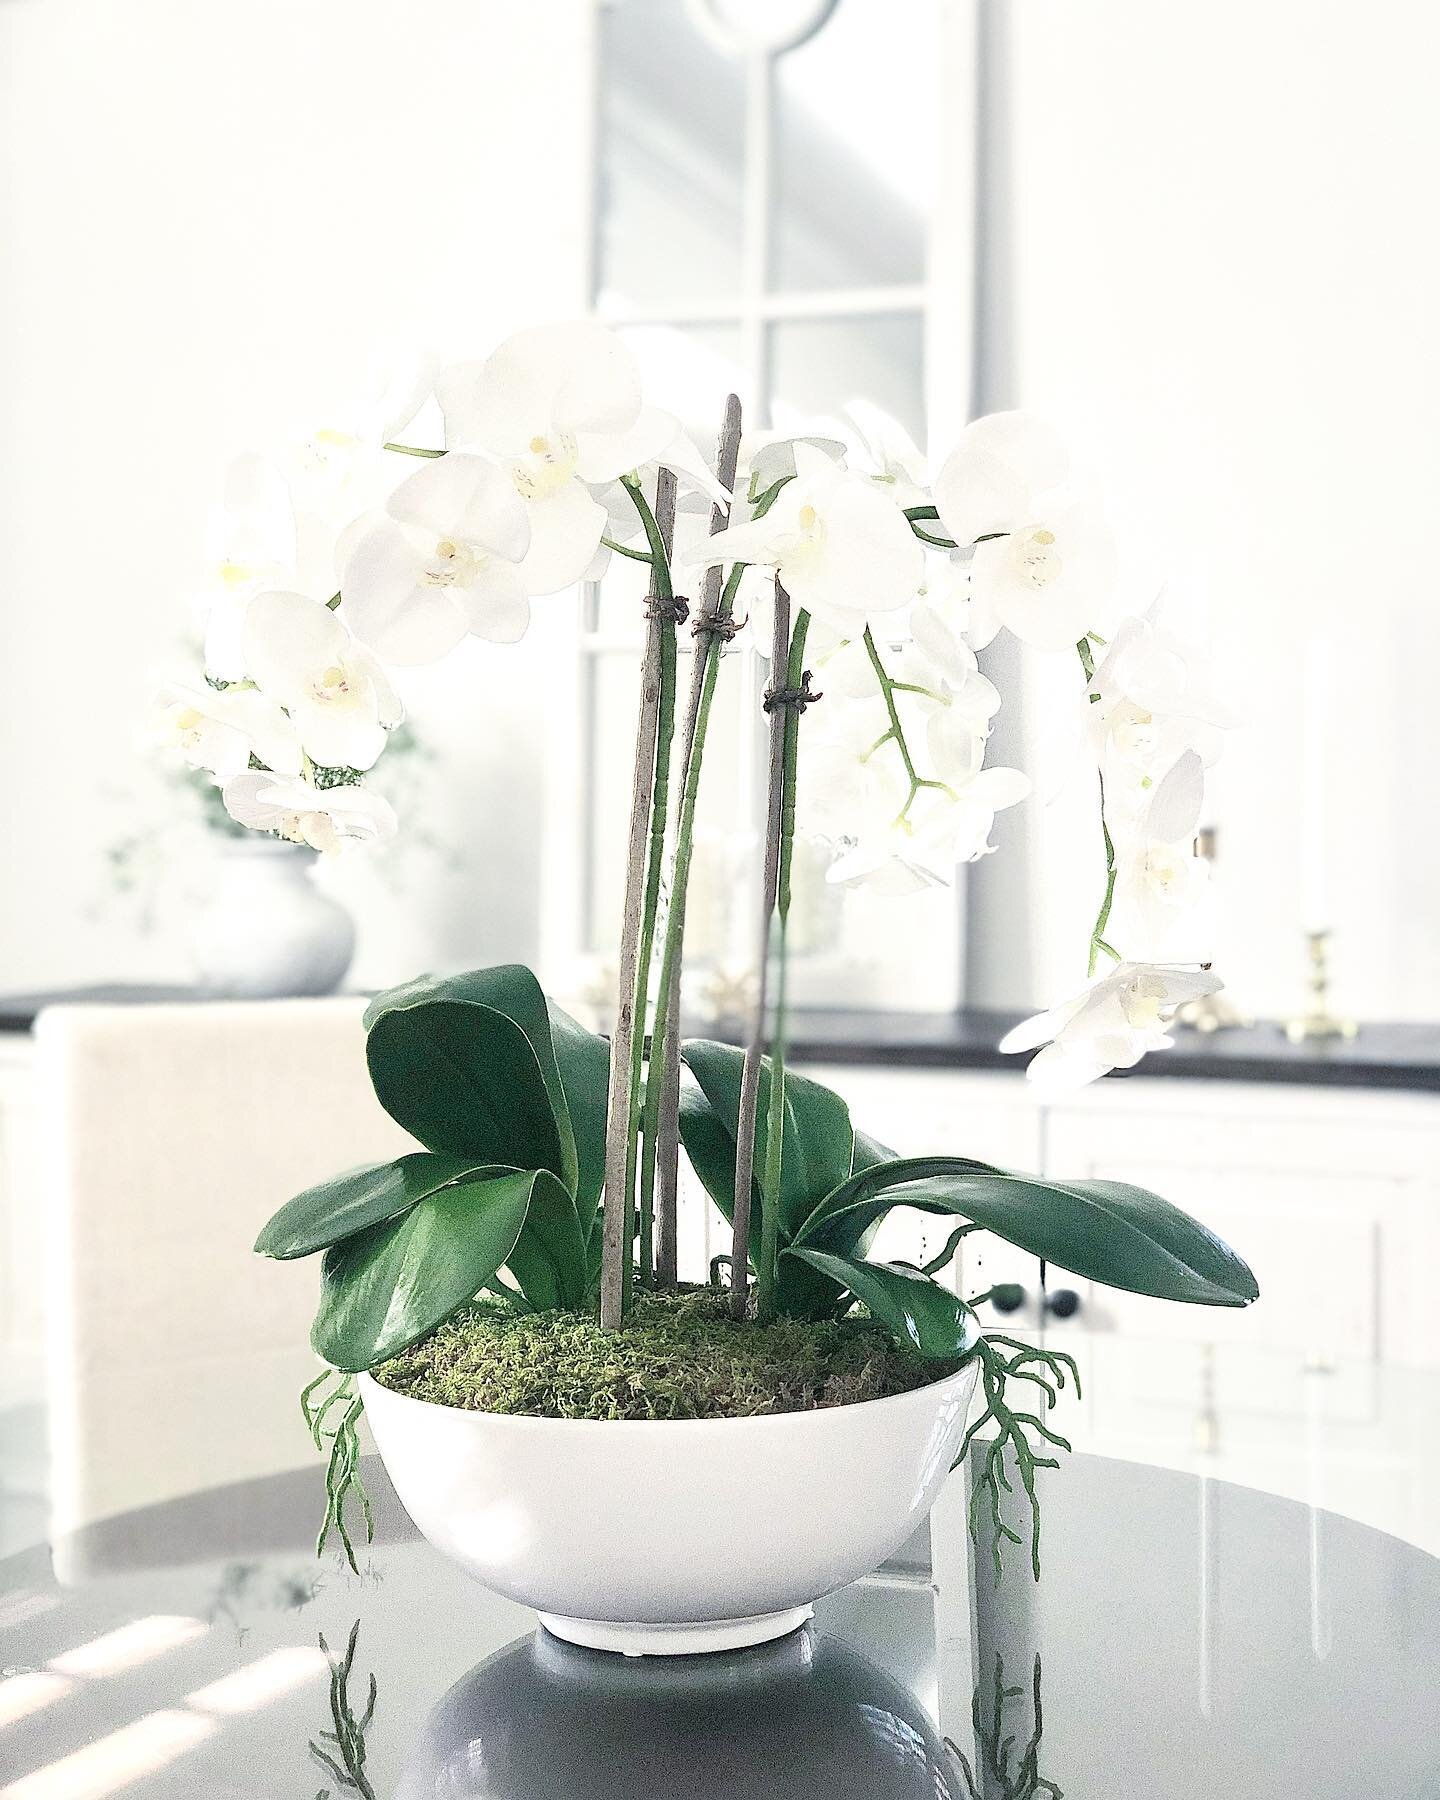 Glass top dining room table with white orchid centerpiece.
Distinctive &bull; Simple &bull; Elegant

Dwell Style Interiors
www.dwellstyleinteriors.com 

#diningroomdecoration #diningroomtablecenterpiece #diningroomtablecenterpieces #whiteorchidcenter